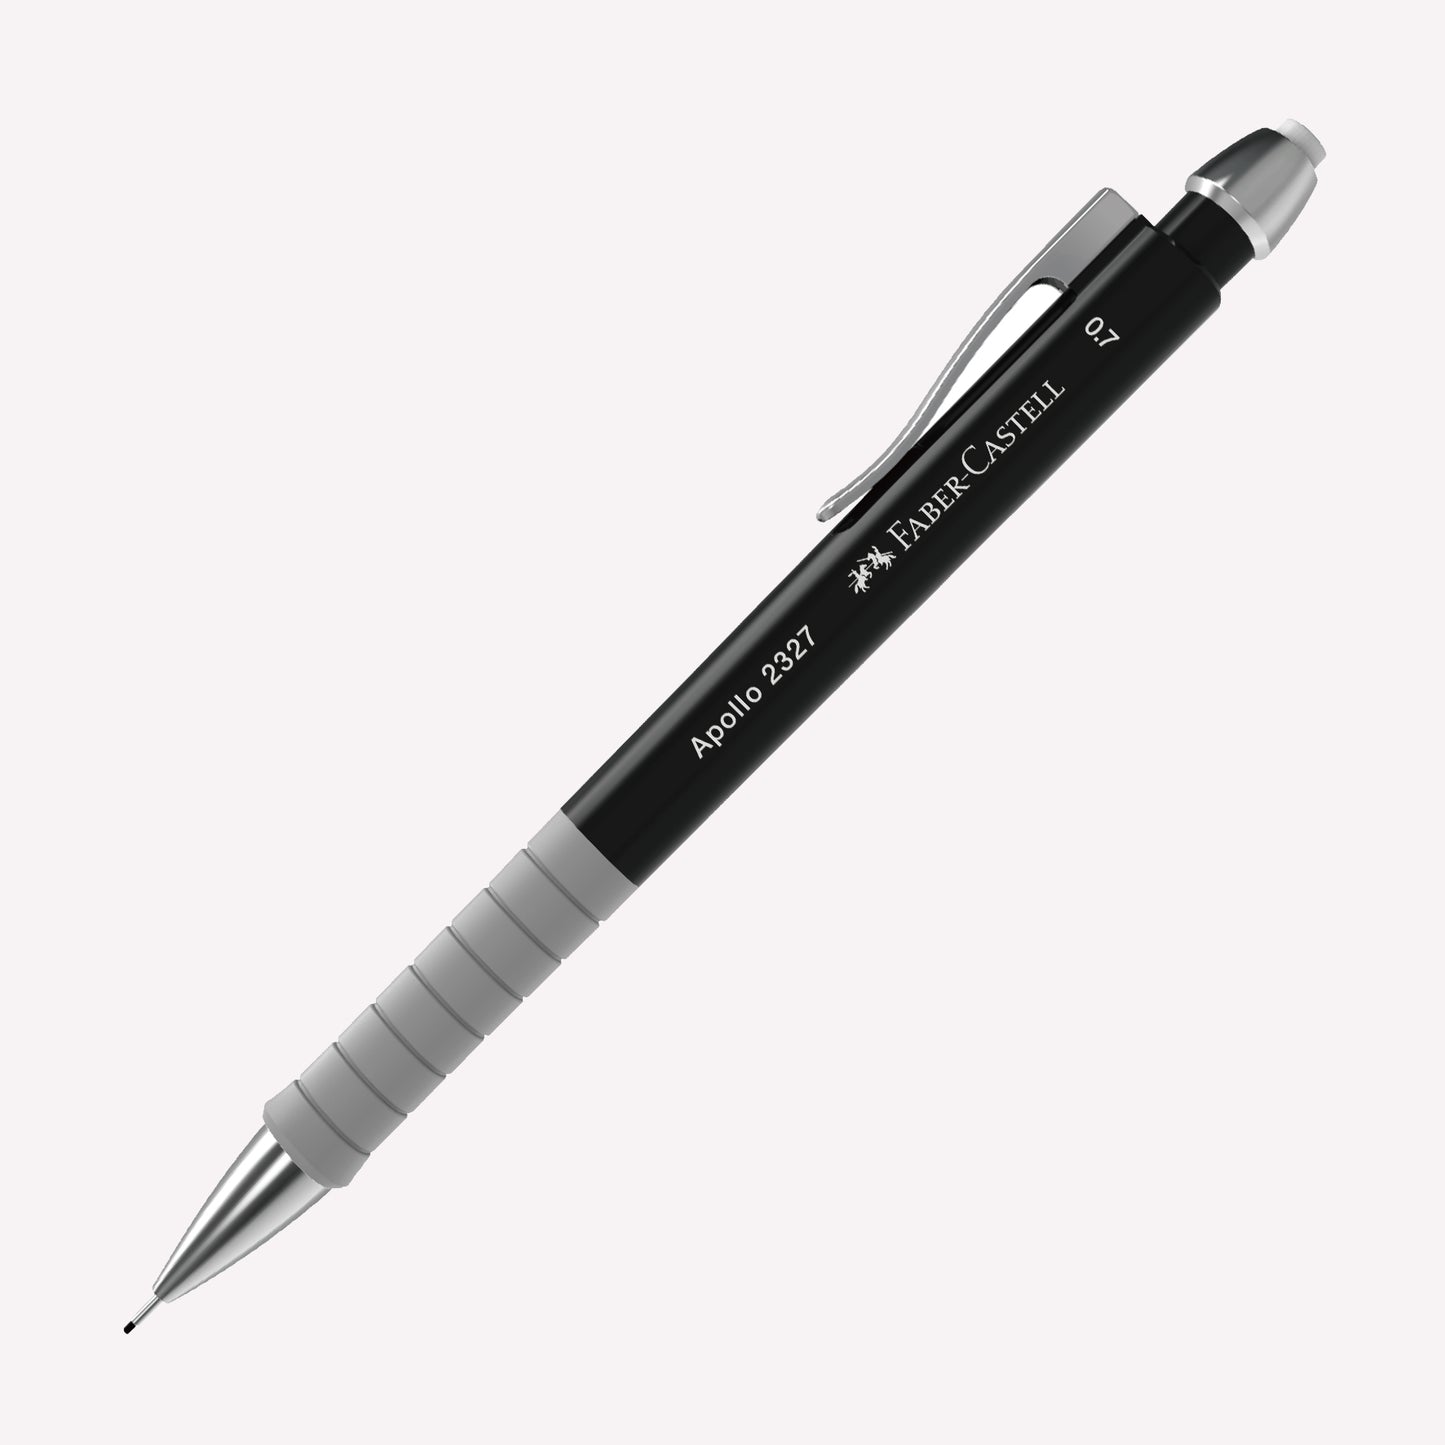 Faber-Castell Apollo 2325 0.7 Mechanical Pencil in black, with a coloured barrel and rubber grip area, topped with a small white eraser. 